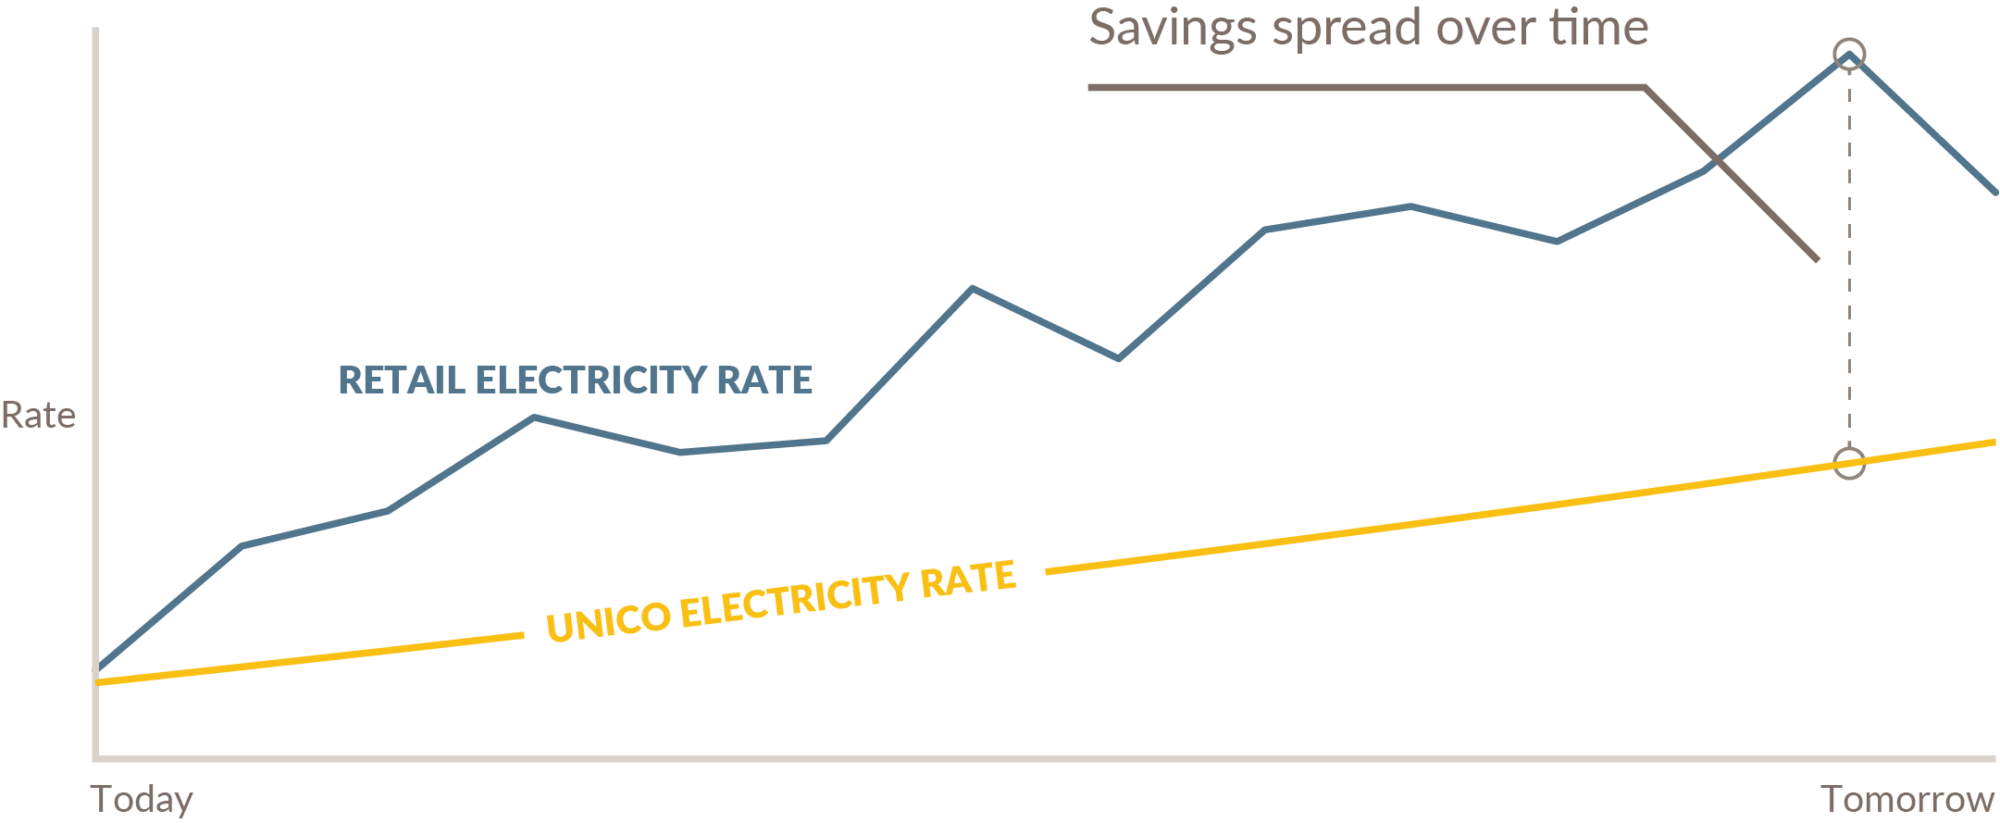 Example graph of energy rates over time. Retail electricity is volatile and climbs faster than Unico's electricity rate, which rises at a flat rate.